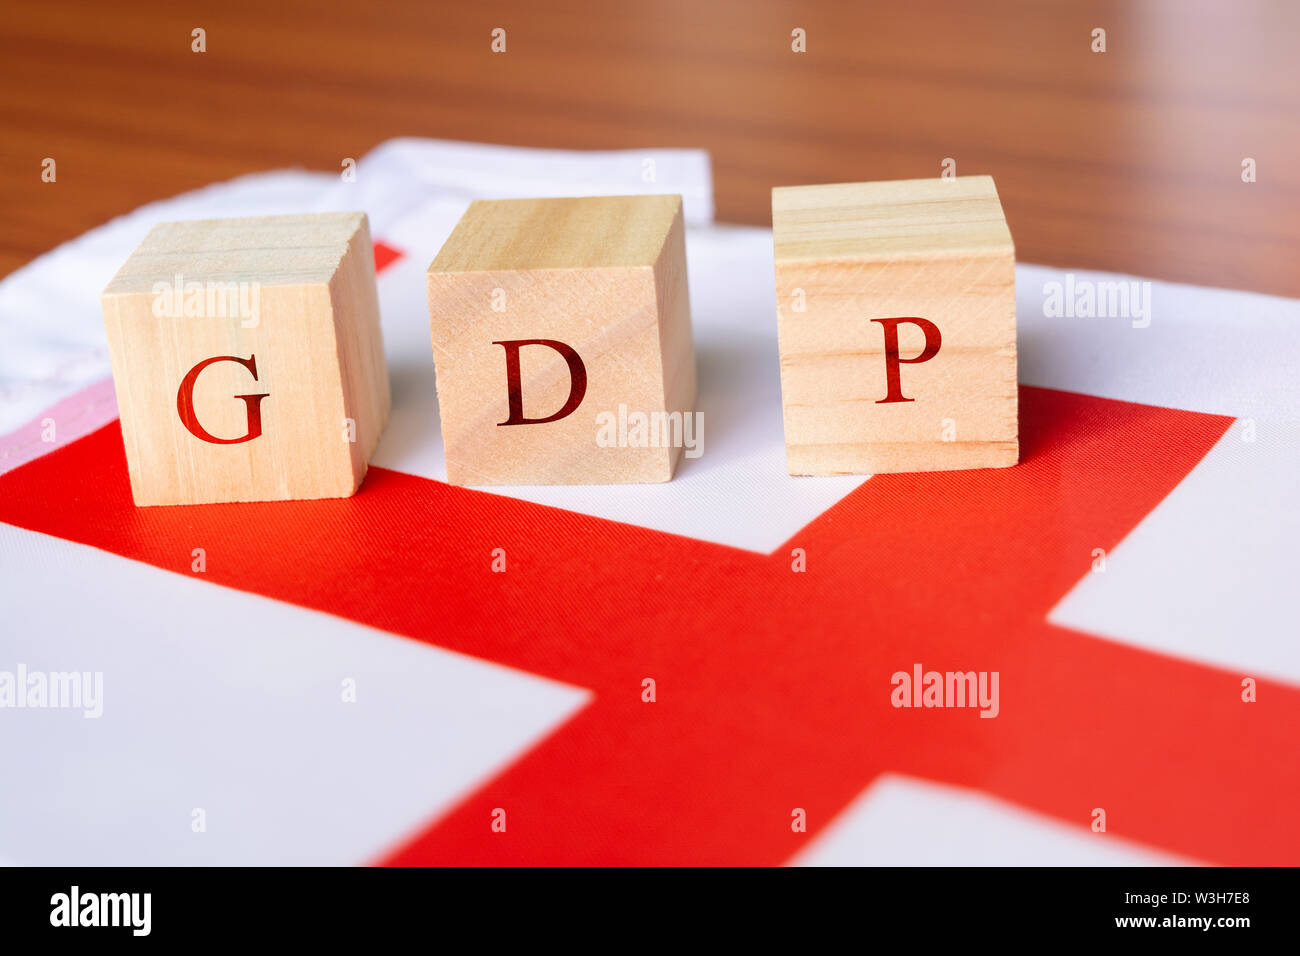 Concept of Gross Domestic Product or GDP of England, GDP in wooden block letter on England Flag Stock Photo